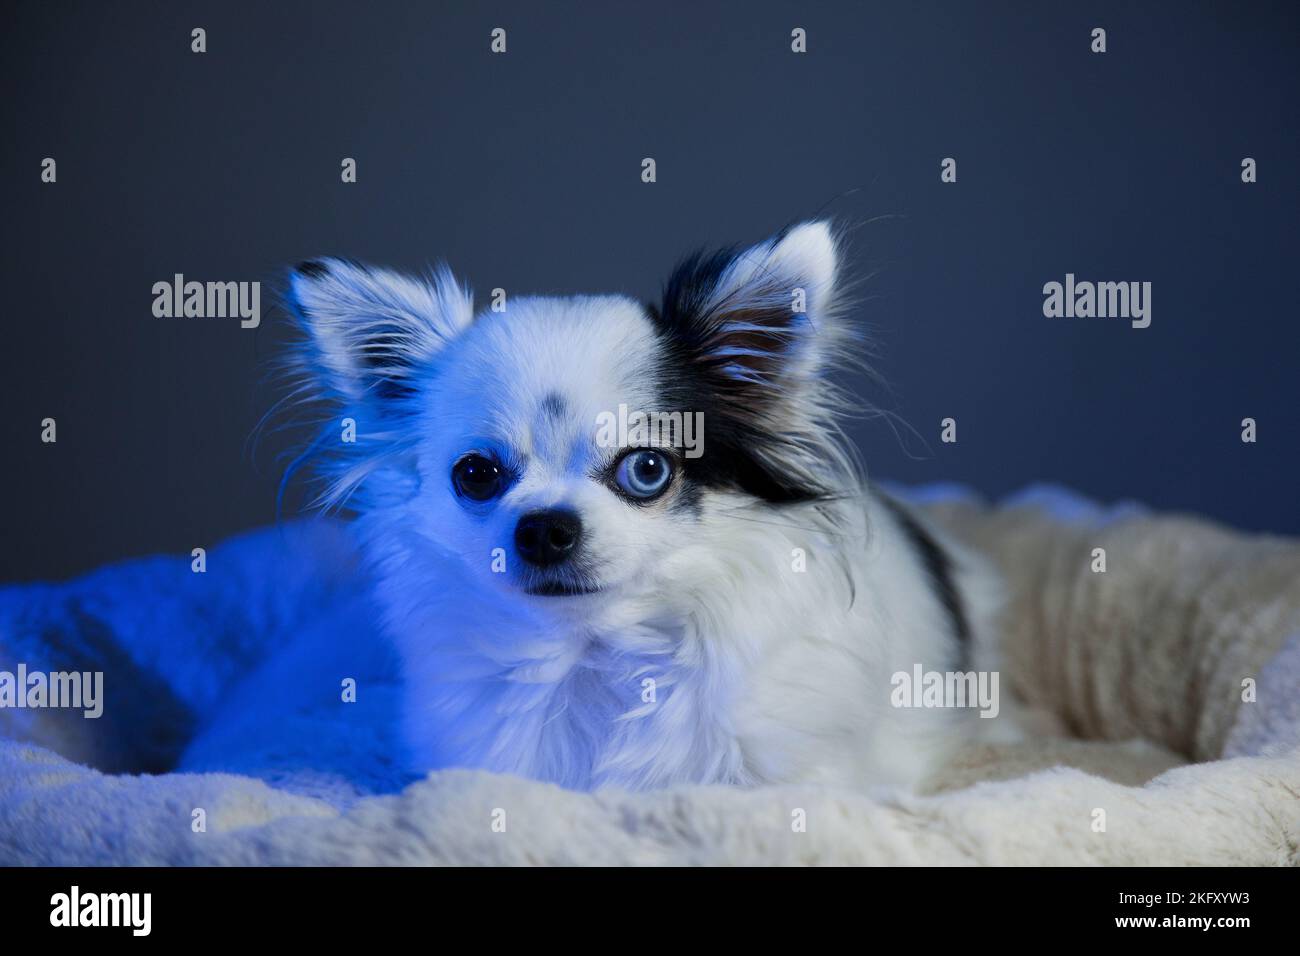 Black and white long hair chihuahua in blue light posing in a white furry bed against a blue background. Studio portrait of a small dog bathed in blue Stock Photo